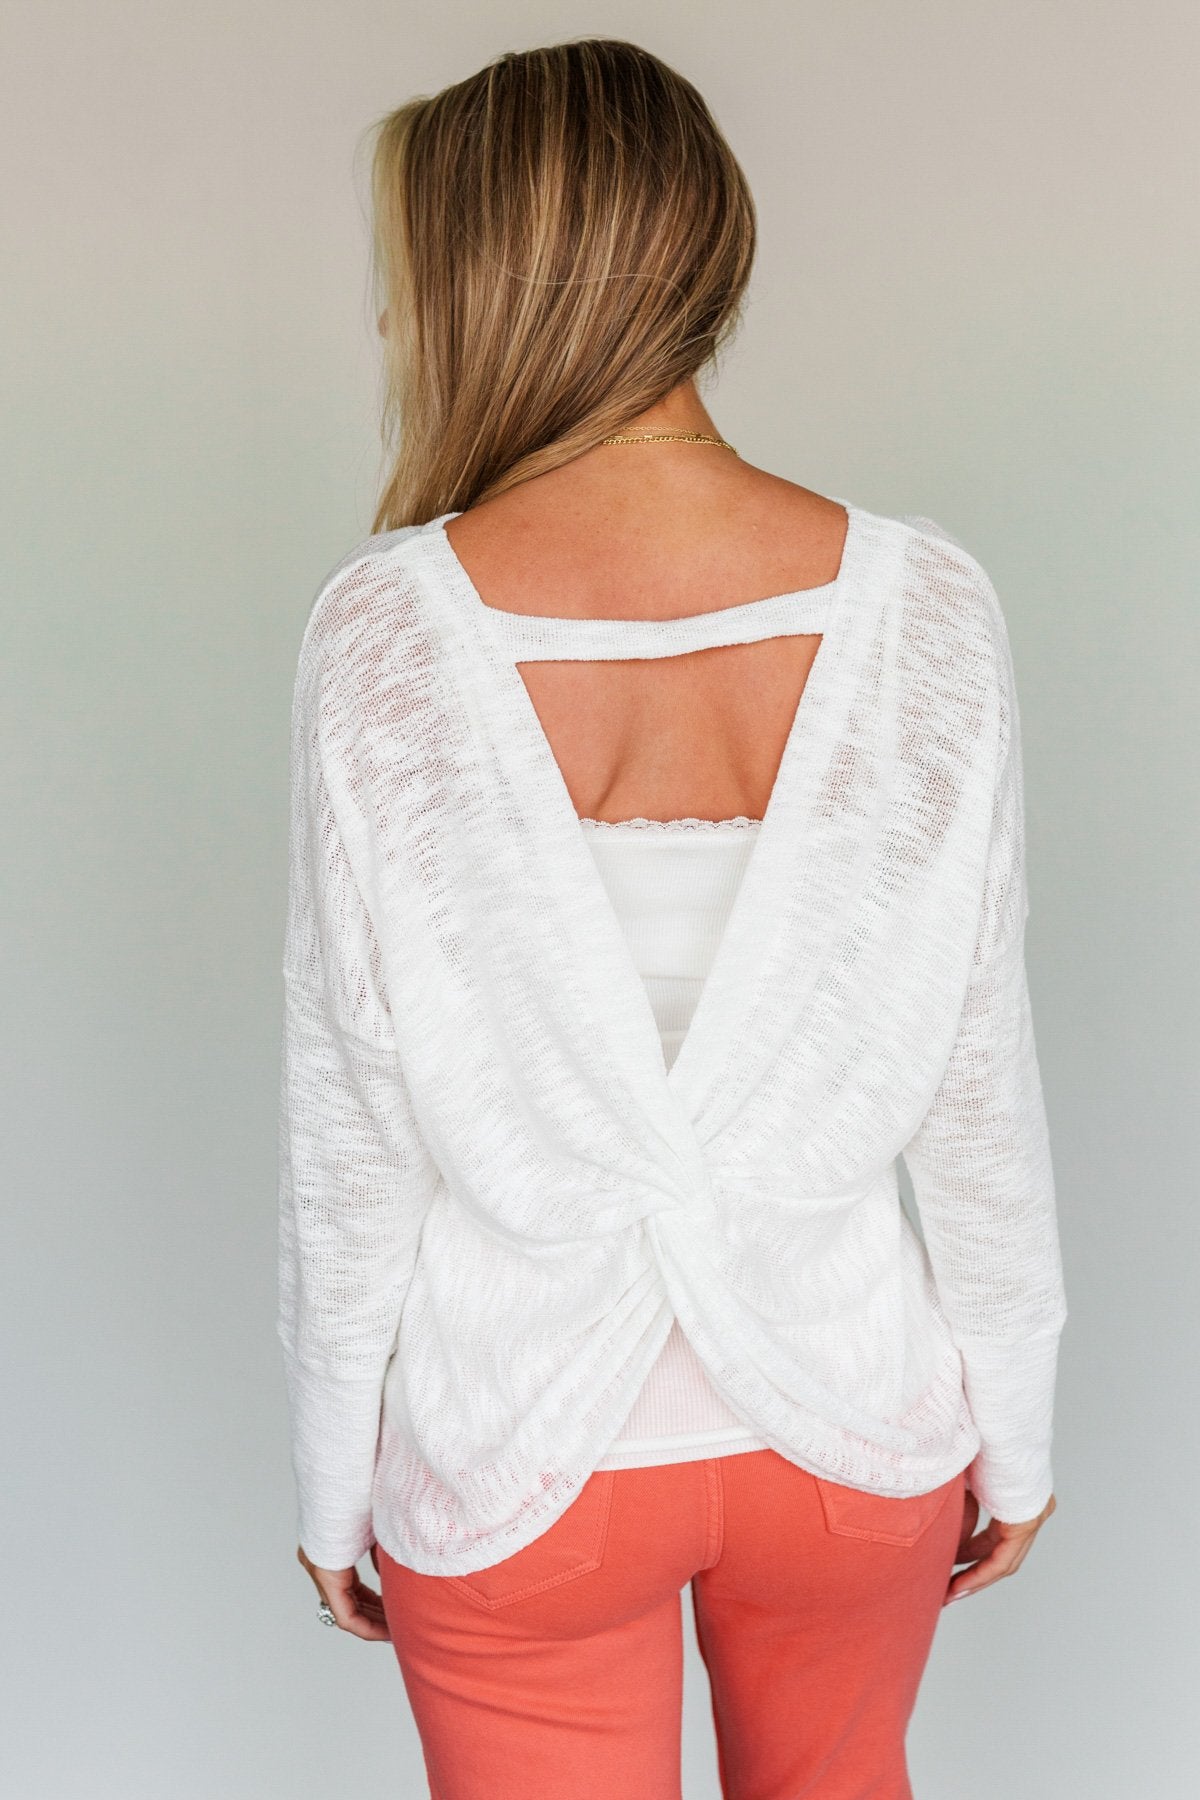 Making A Change Long Sleeve Top- Ivory